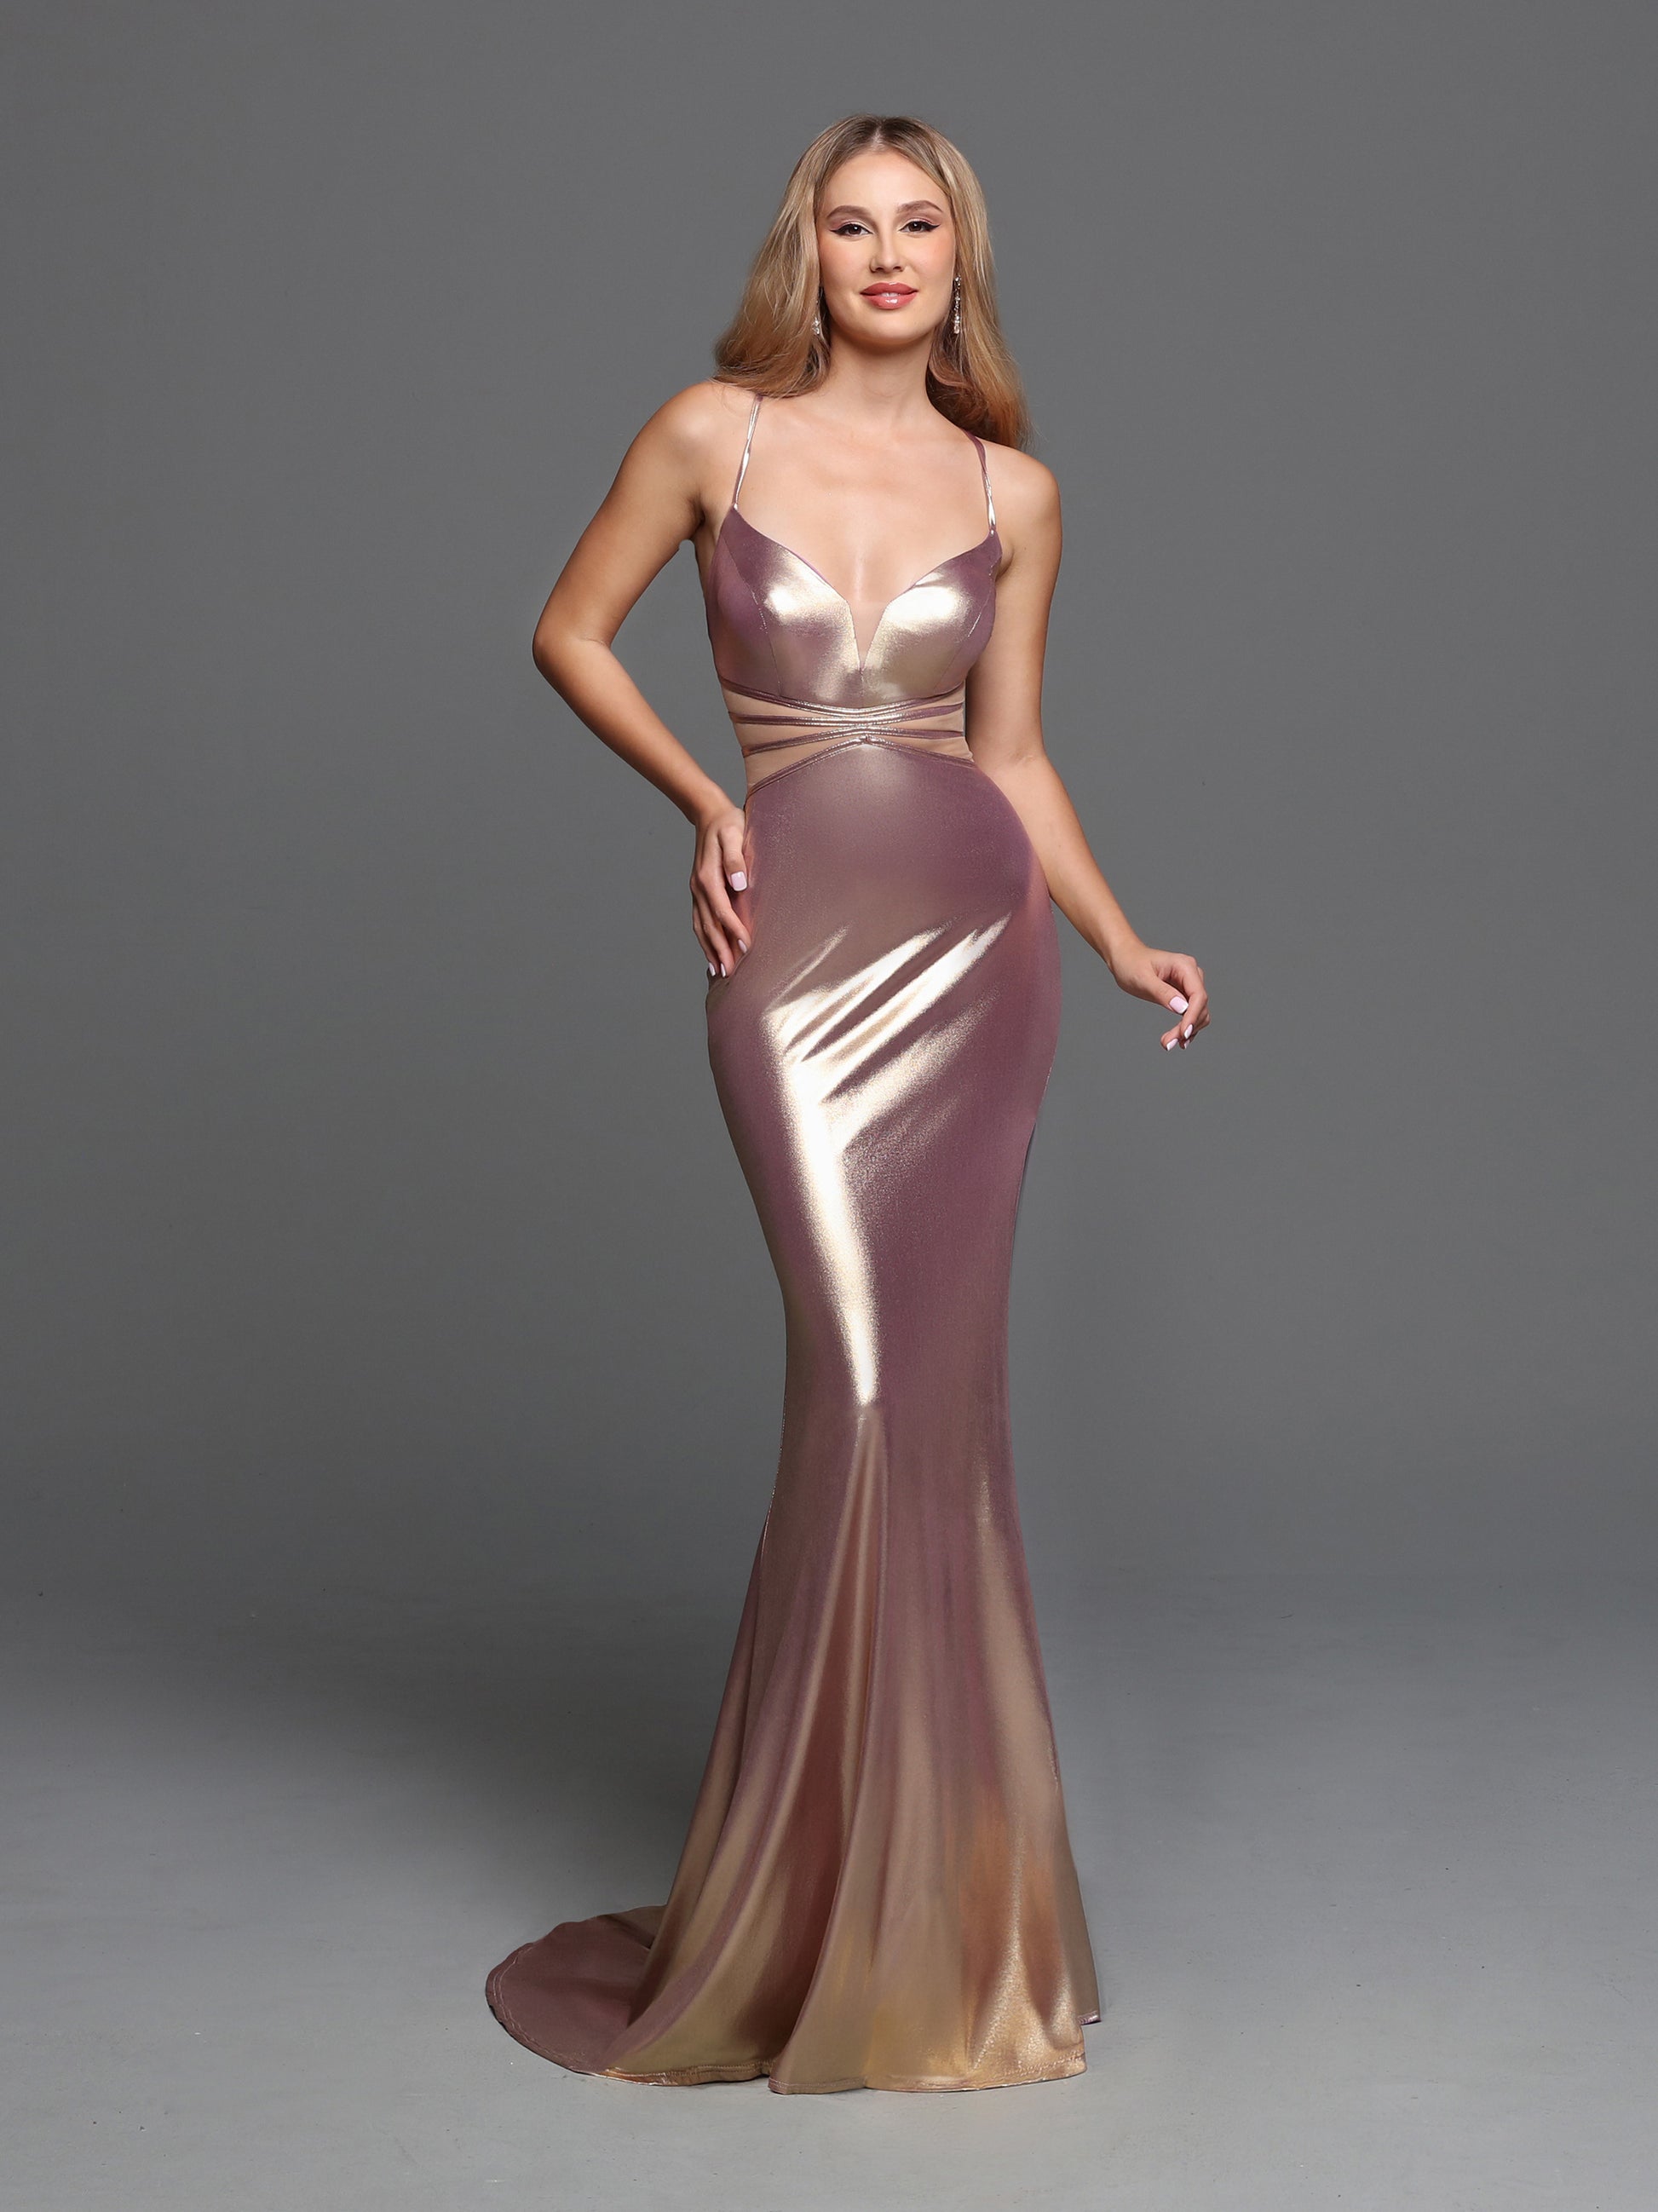 Parkle Prom 72231 Long Fitted Metallic Jersey Illusion Cutout Sheer Corset Prom Dress Formal Gown Color Shifting holographic gown  Sizes: 0-20  Colors: Gold/Lilac